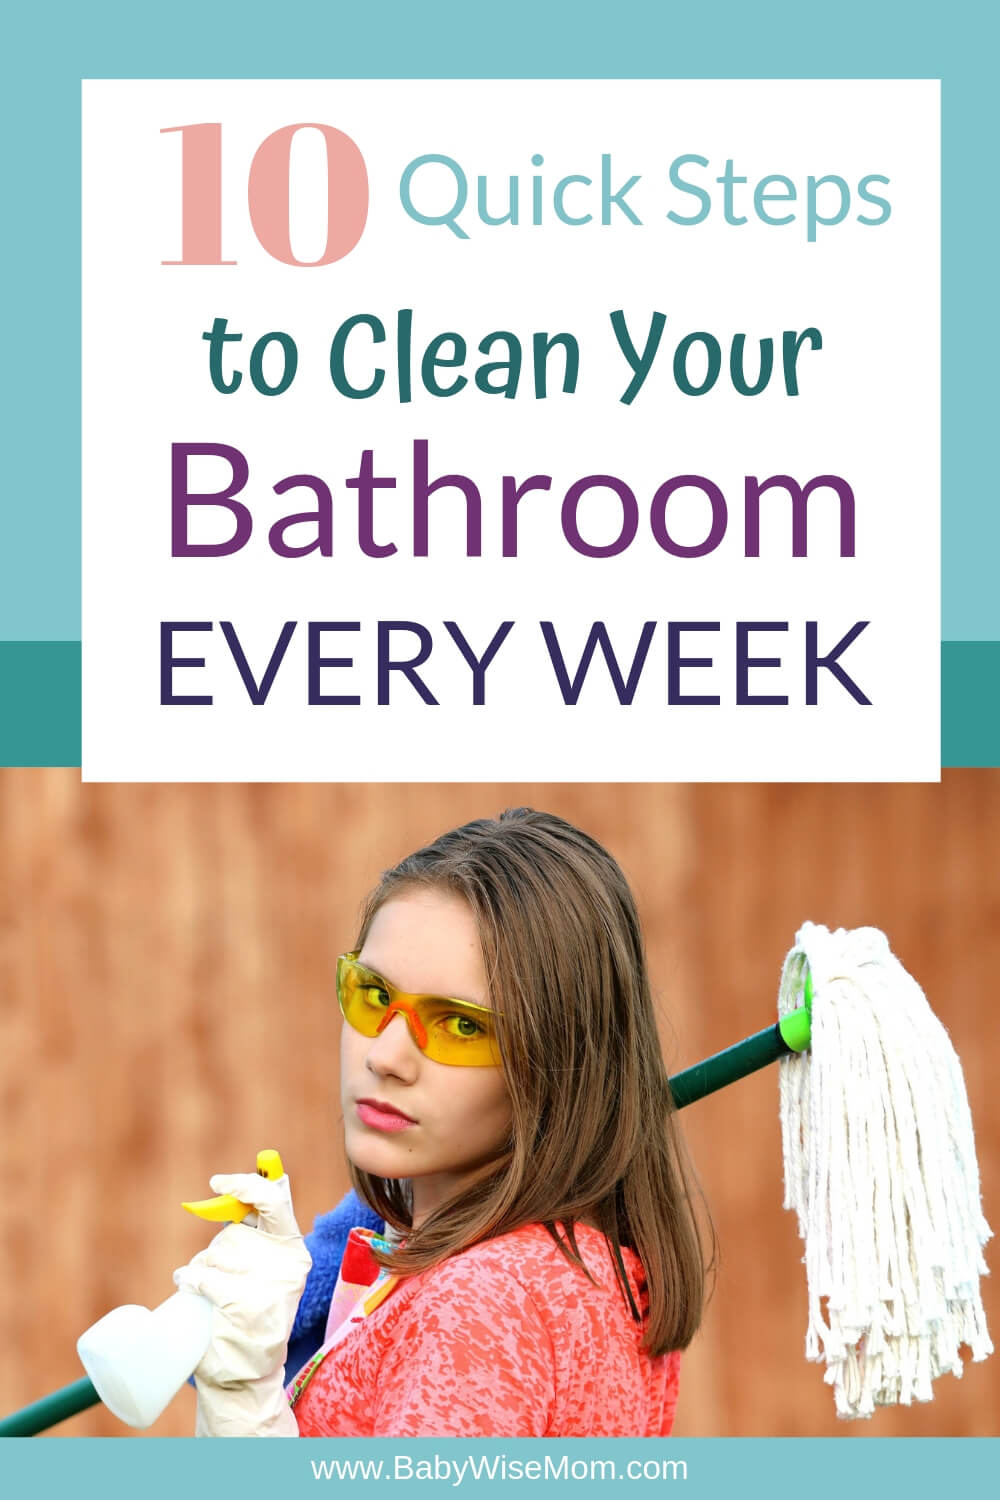 10 steps to clean the bathroom with a picture of a woman holding cleaning supplies